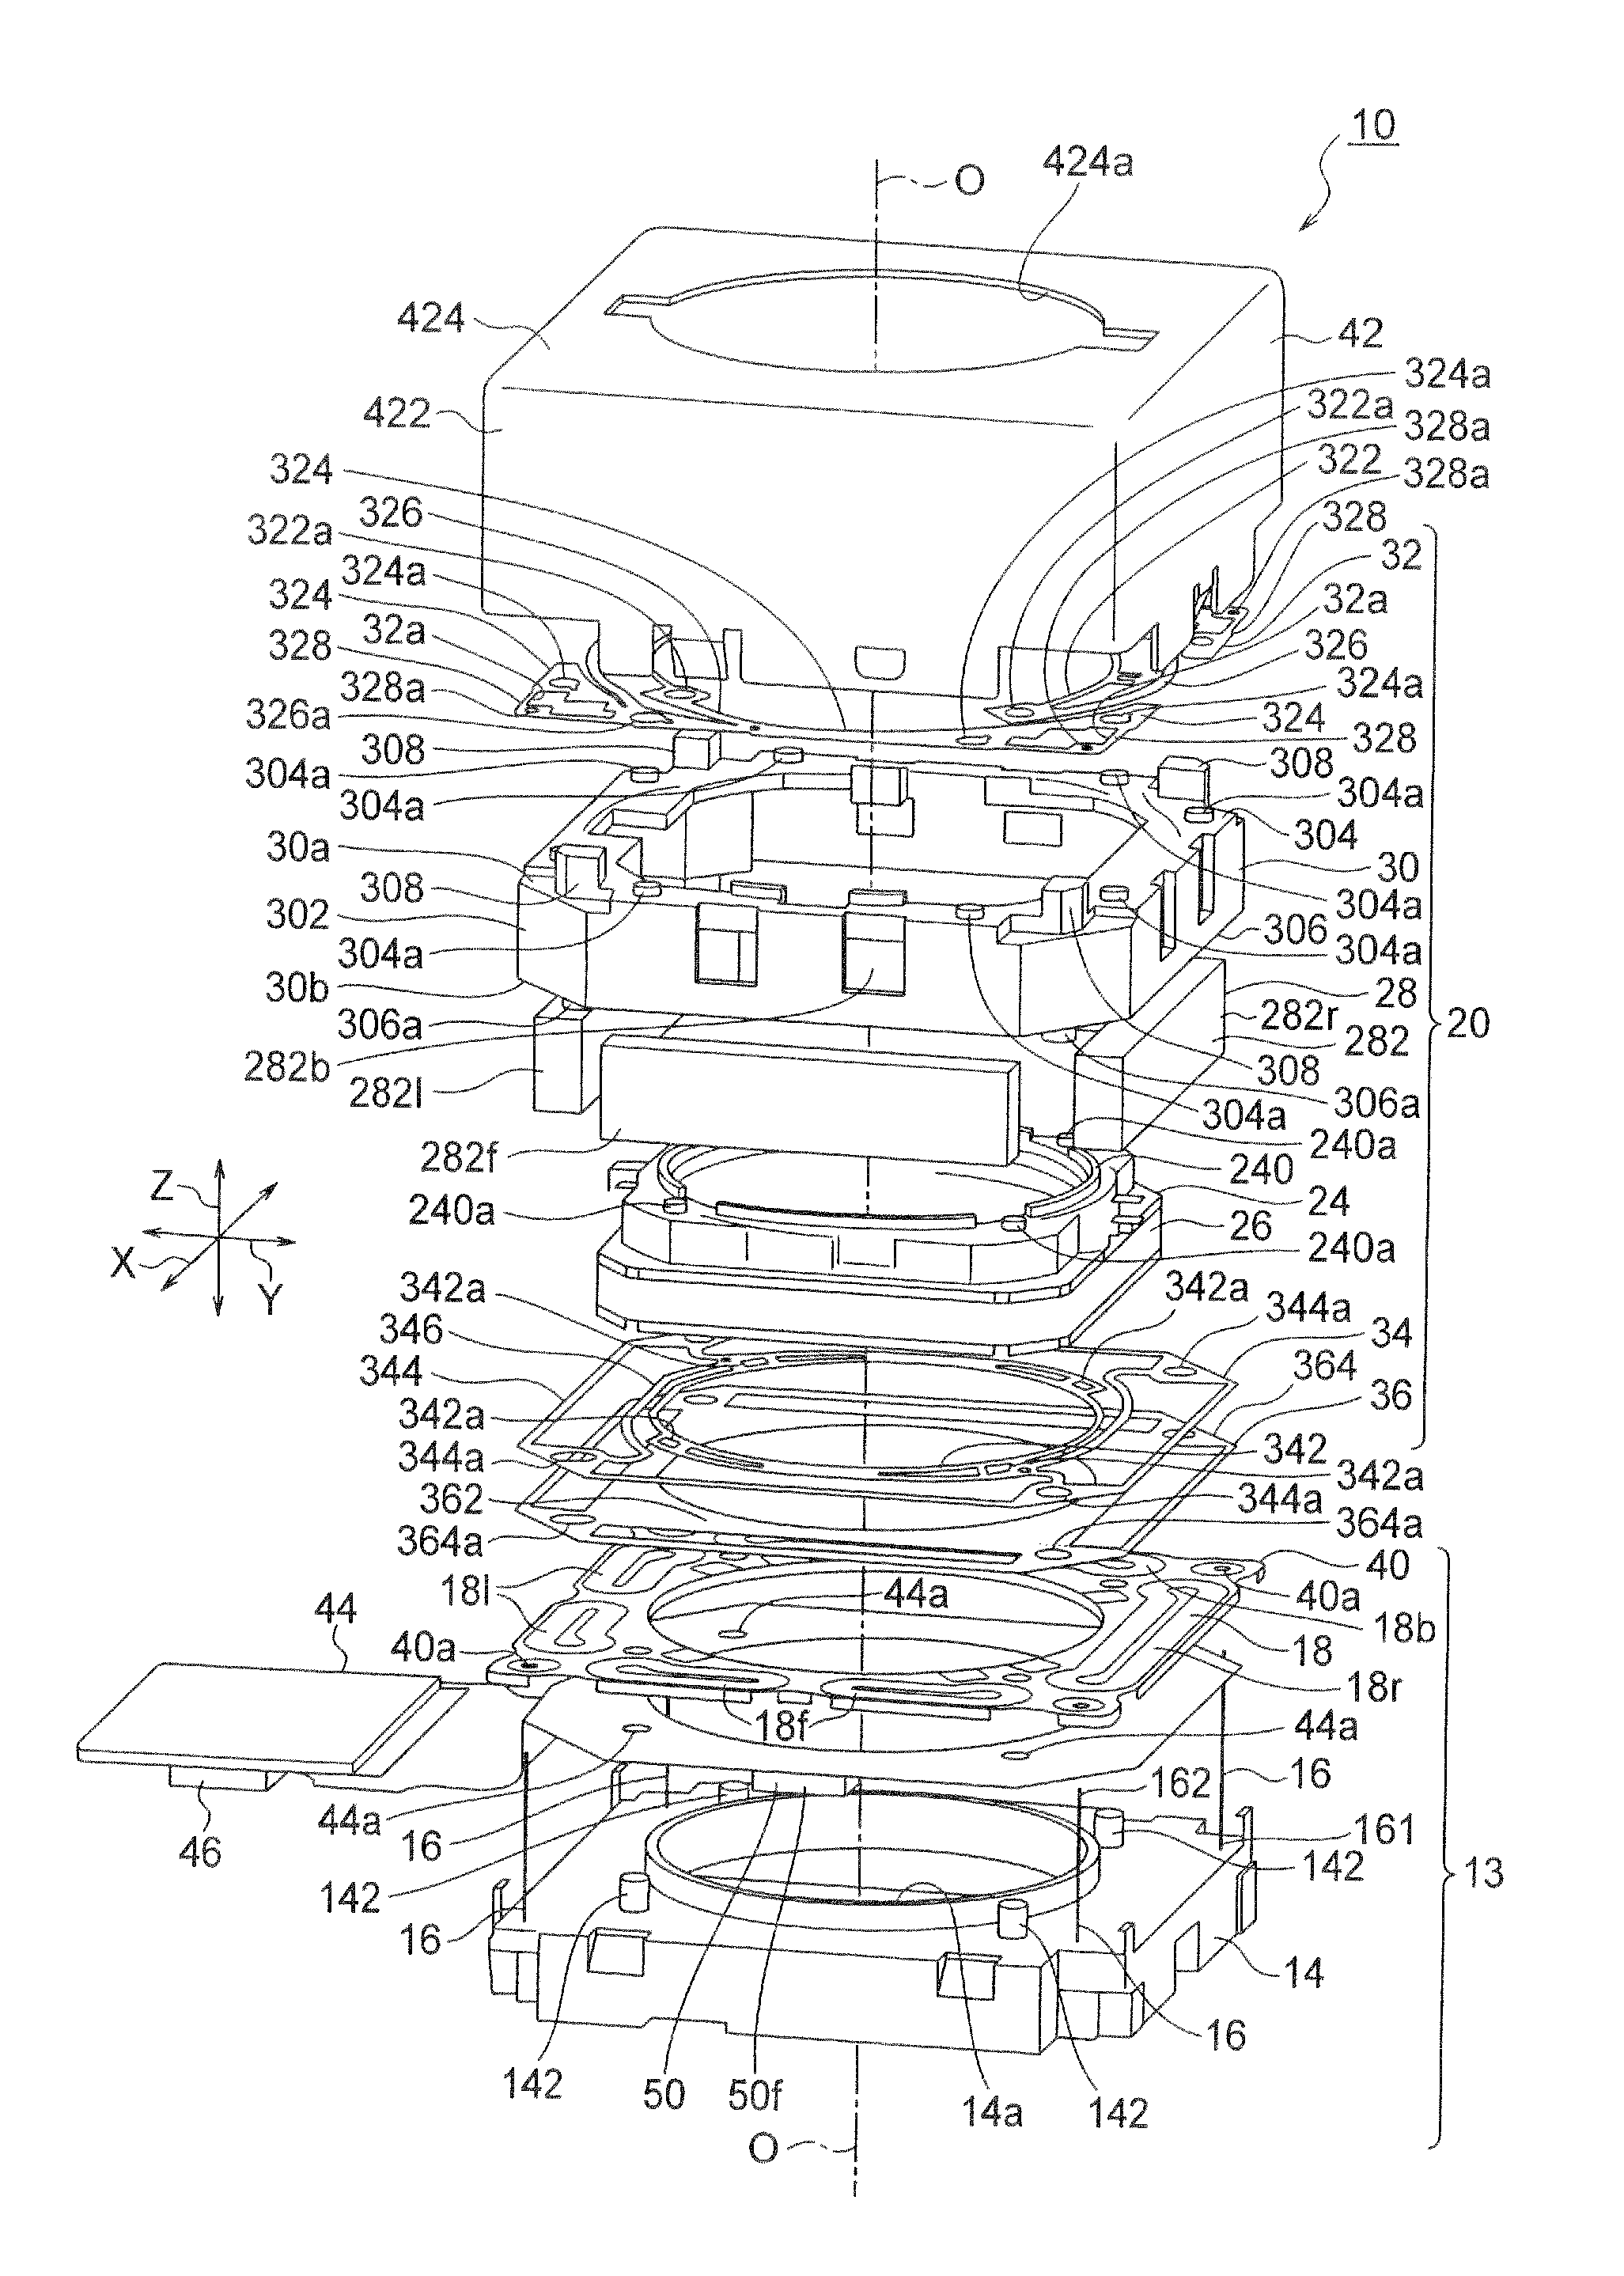 Lens holder driving device including fracture preventing member for suspension wires